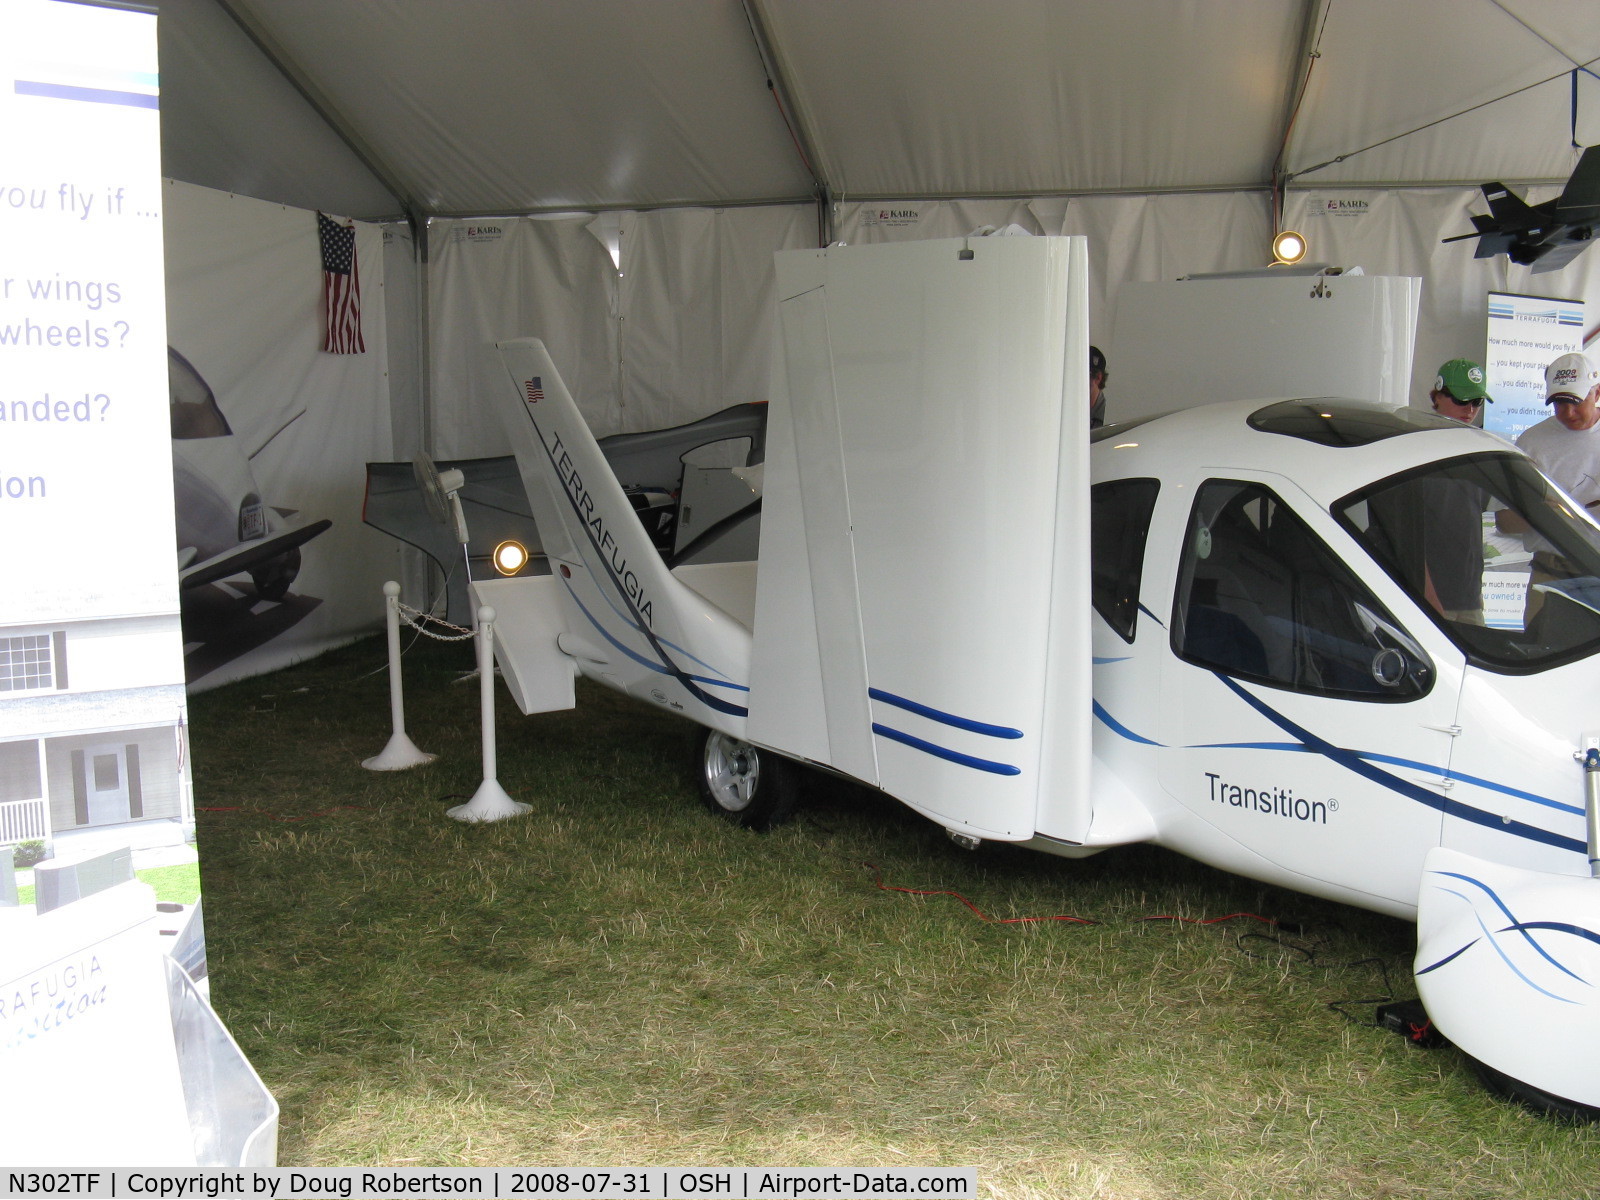 N302TF, 2008 Terrafugia Transition C/N D0001, 2008 Terrafugia TRANSITION canard foldable wing developmental roadable LSA, Rotax 912S 100 Hp pusher, designed to automotive crash safety standards, street-legal- with option of full-vehicle parachute recovery system. Target price: $194,000.